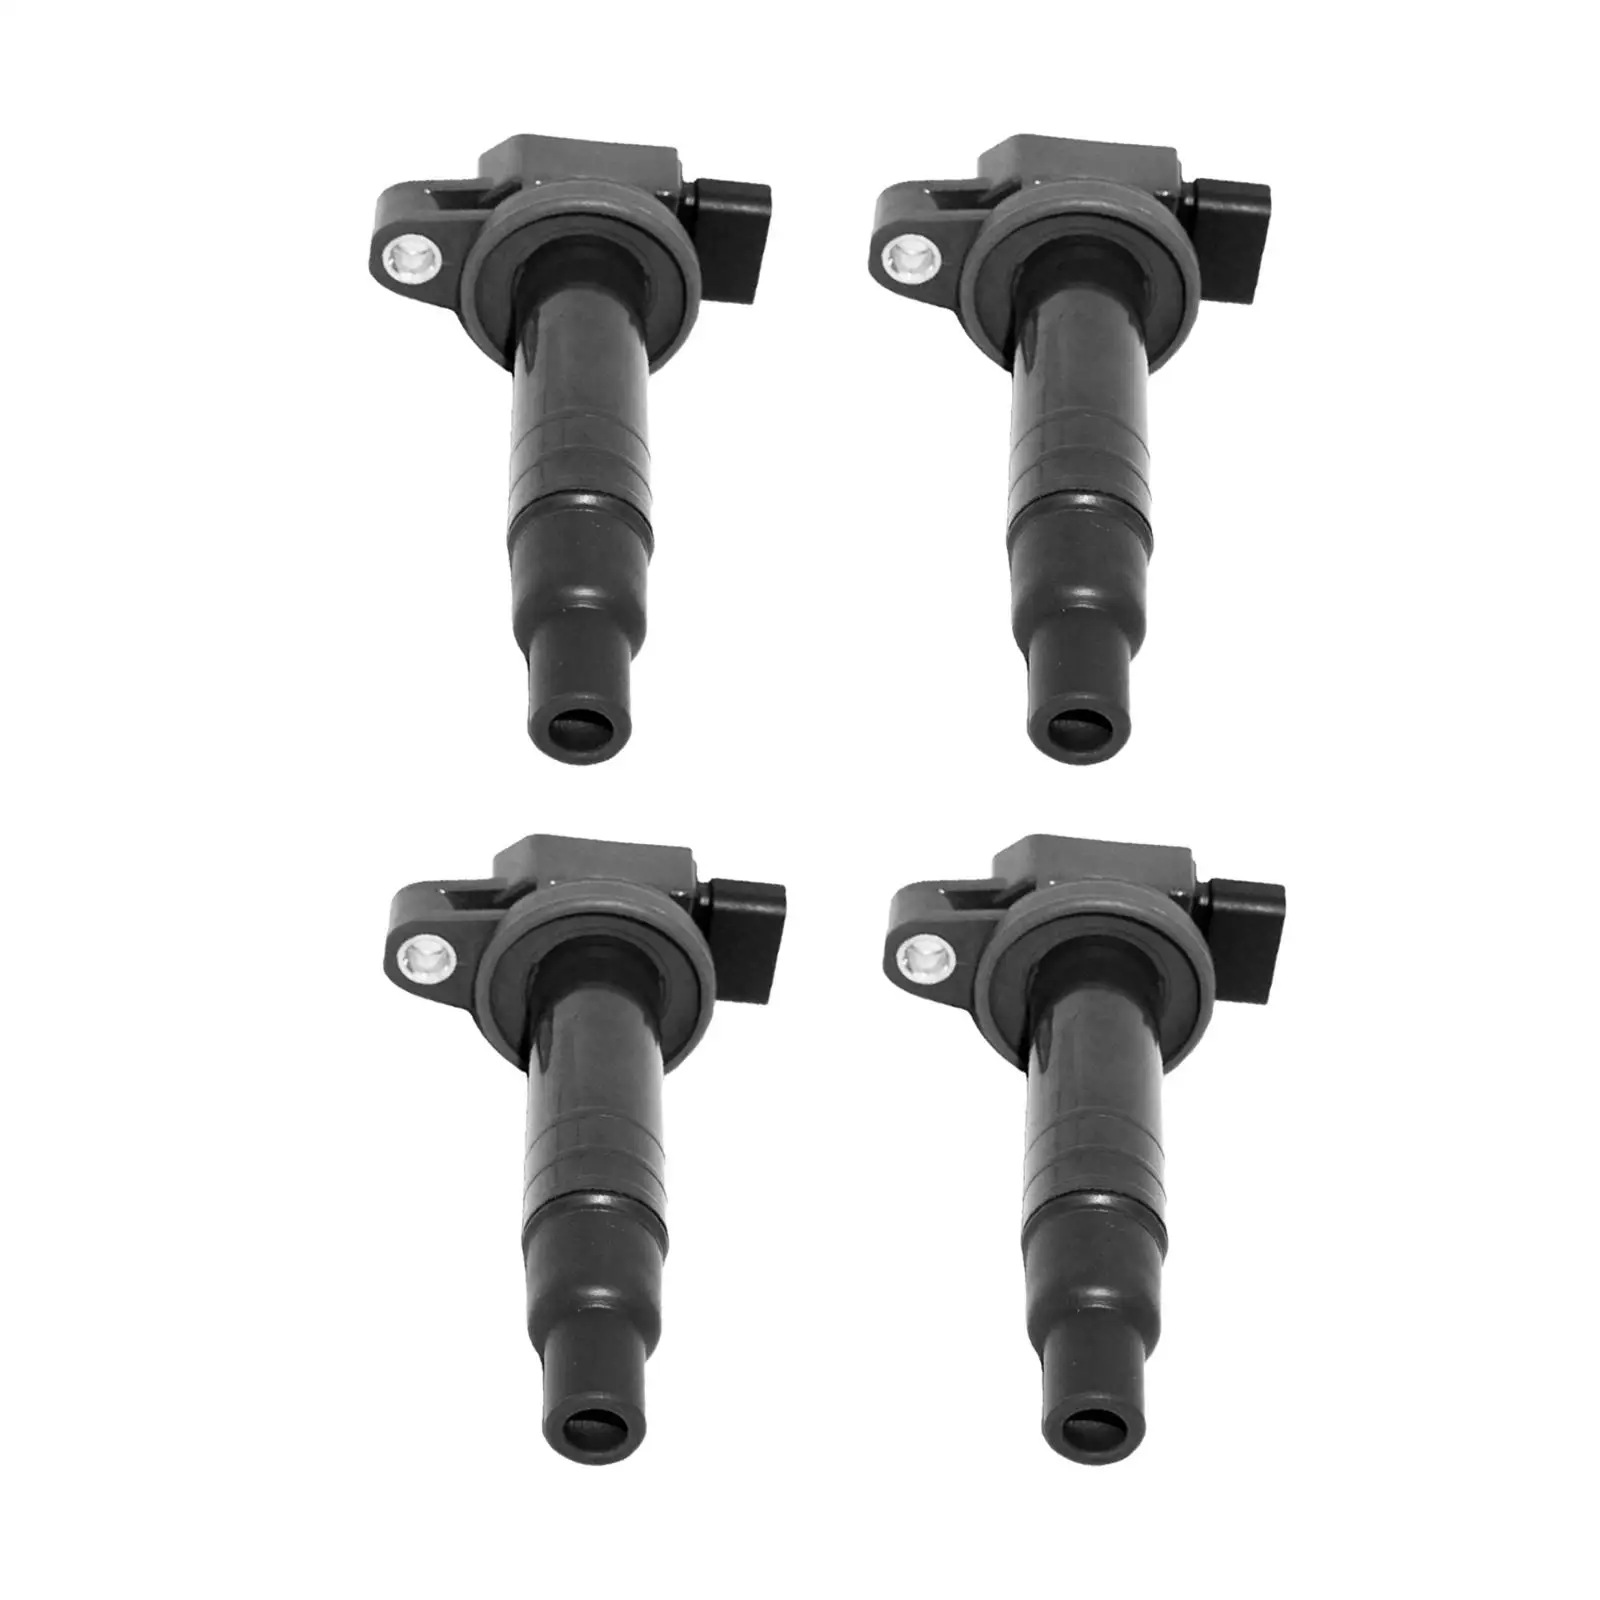 4x Ignition Coils 90919-02240 Repair Parts Durable Easy to Install Replacement Accessories for Toyota 1.5L for prius Echo Yaris